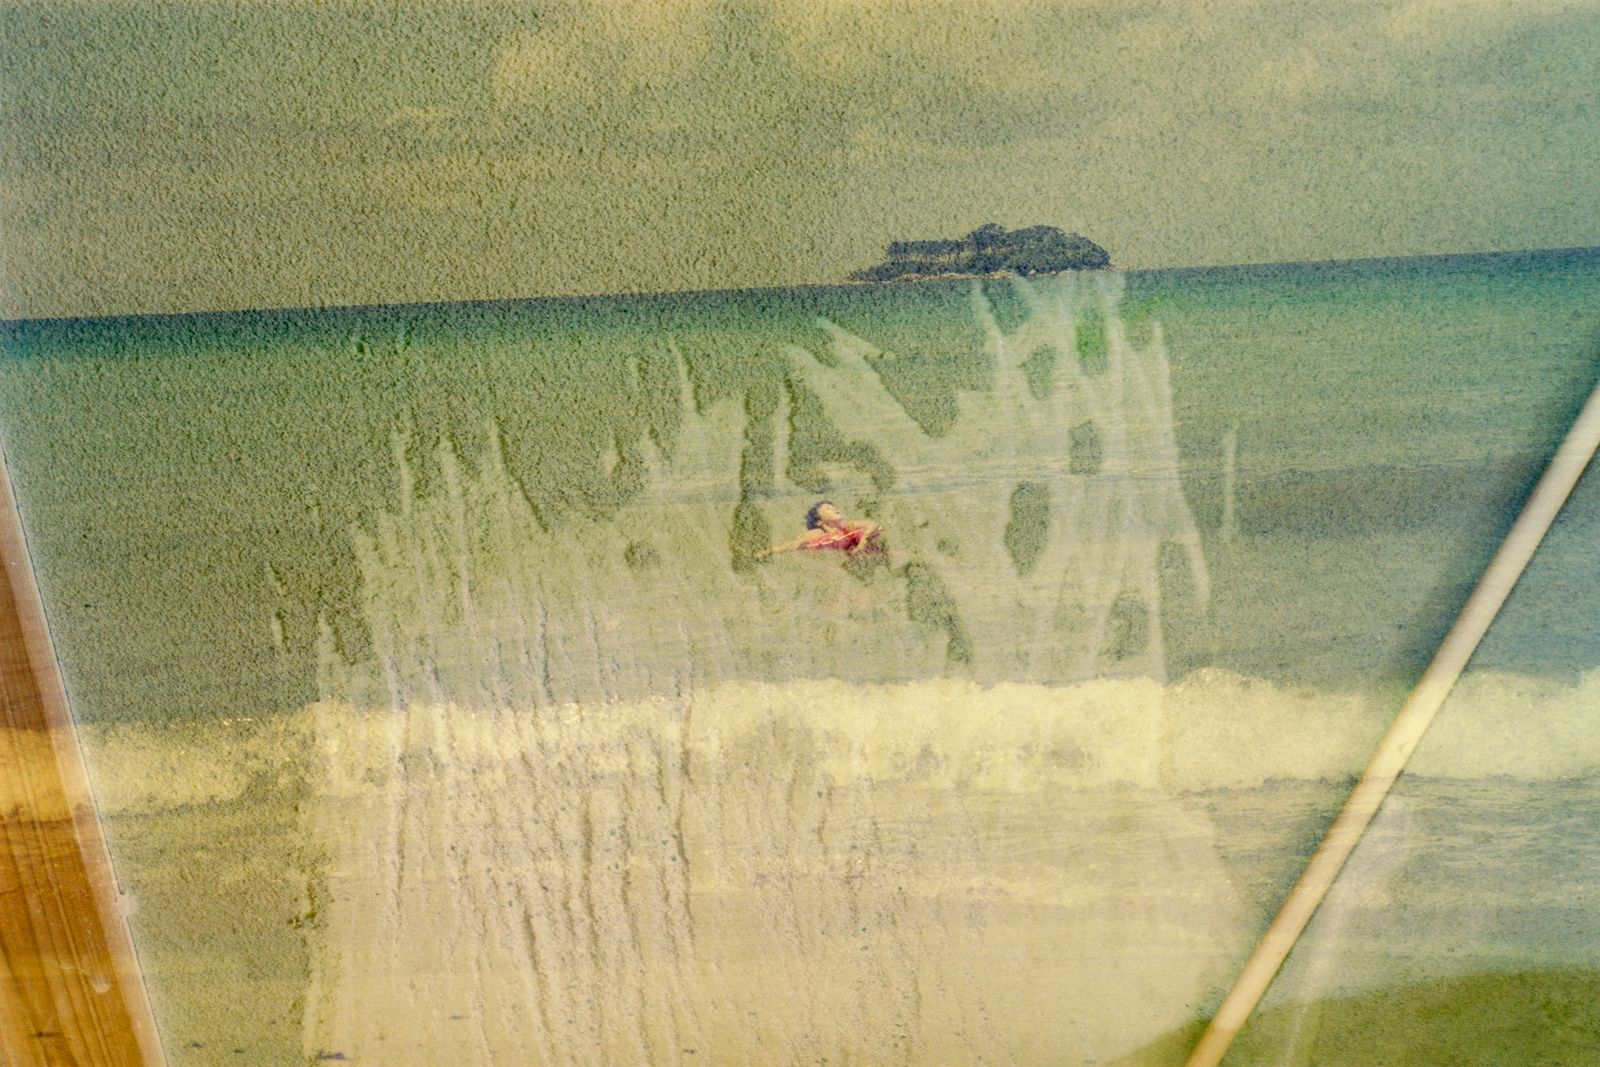 © Sayuri Ichida - My mother swimming in the sea on her honeymoon. And the scratch marks on the wall made by our dog.